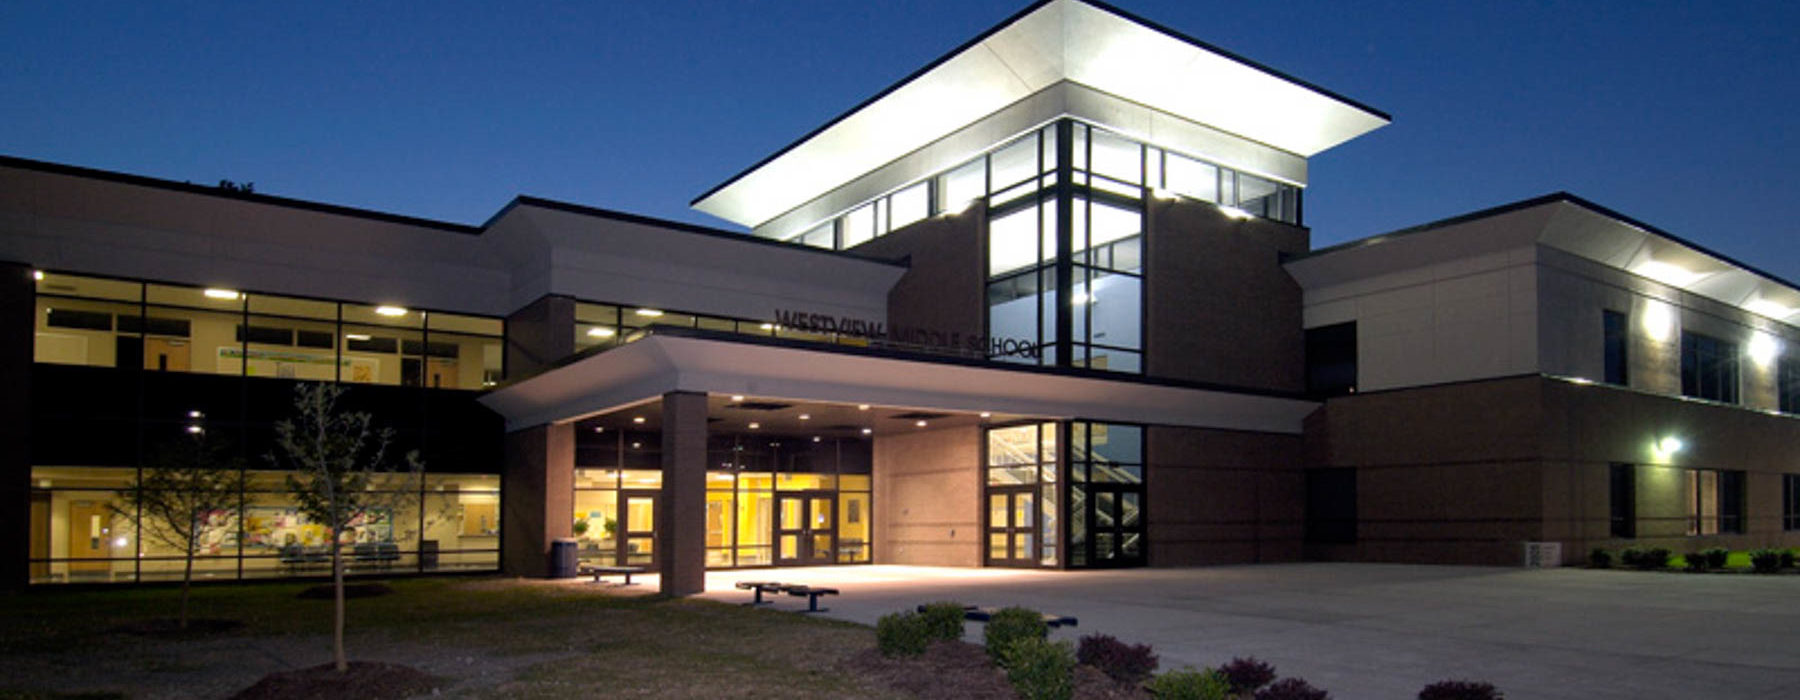 Westview Middle School Exterior at Night